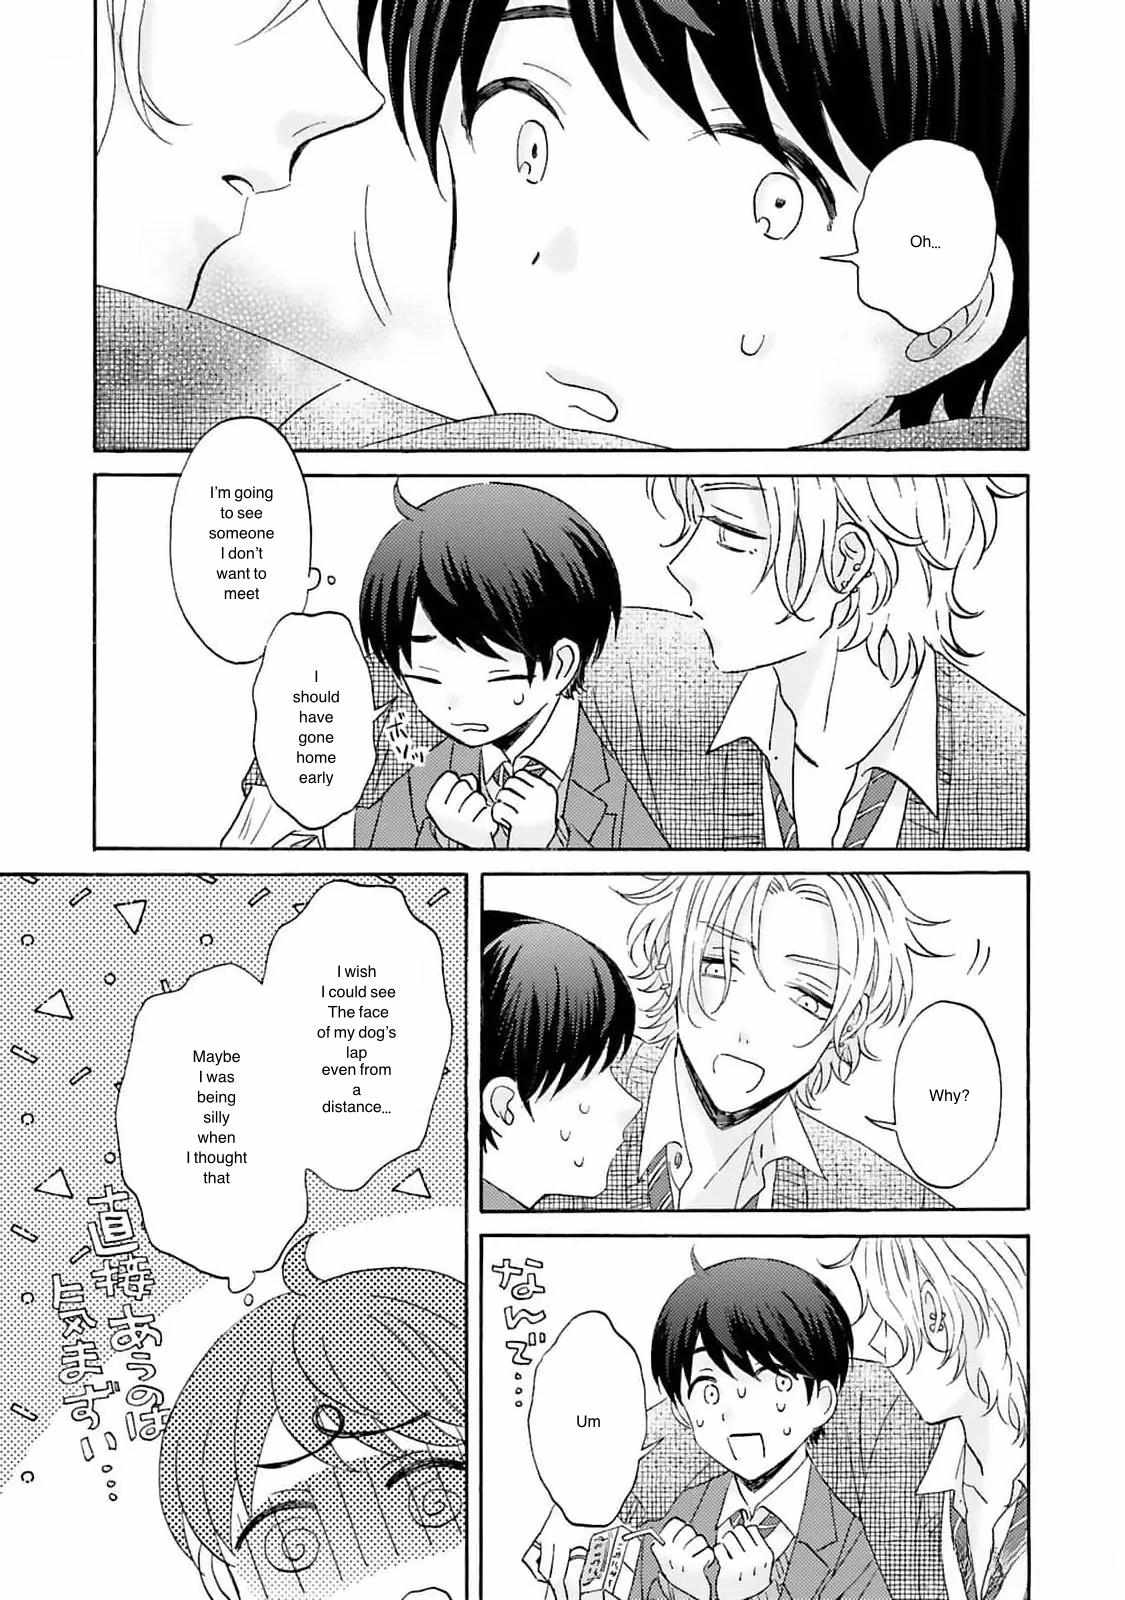 My Cutie Pie -An Ordinary Boy And His Gorgeous Childhood Friend- 〘Official〙 - 4 page 29-2511a2a3